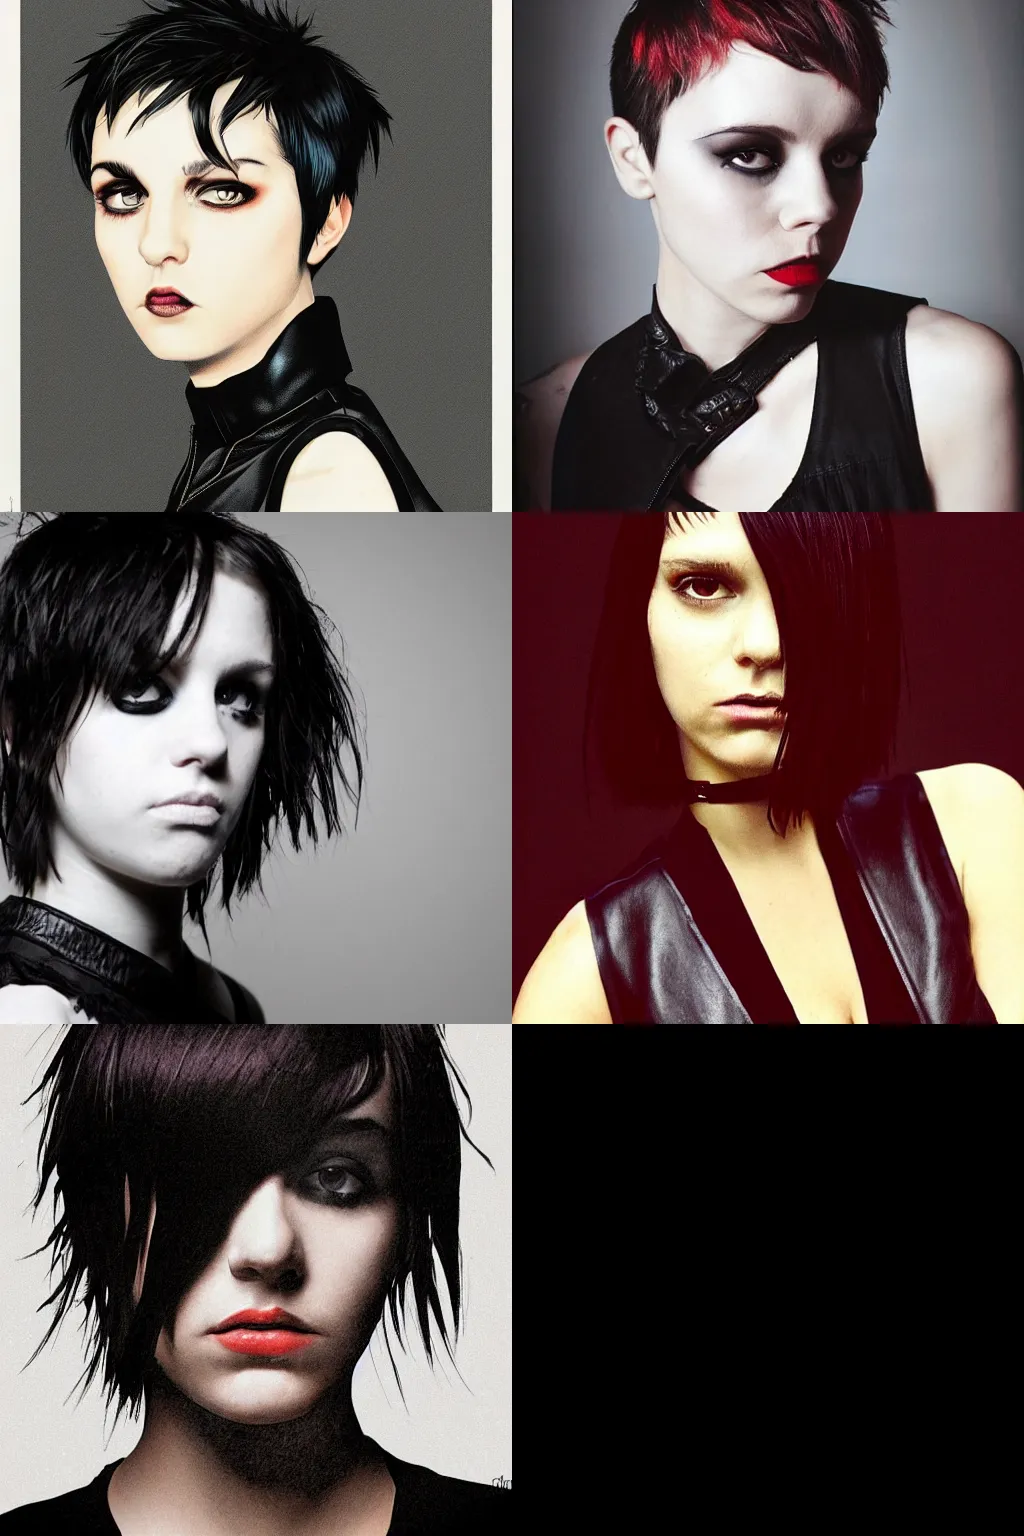 Prompt: an emo portrait by martin ansin. her hair is dark brown and cut into a short, messy pixie cut. she has a slightly rounded face, with a pointed chin, large entirely - black eyes, and a small nose. she is wearing a black tank top, a black leather jacket, a black knee - length skirt, and a black choker..